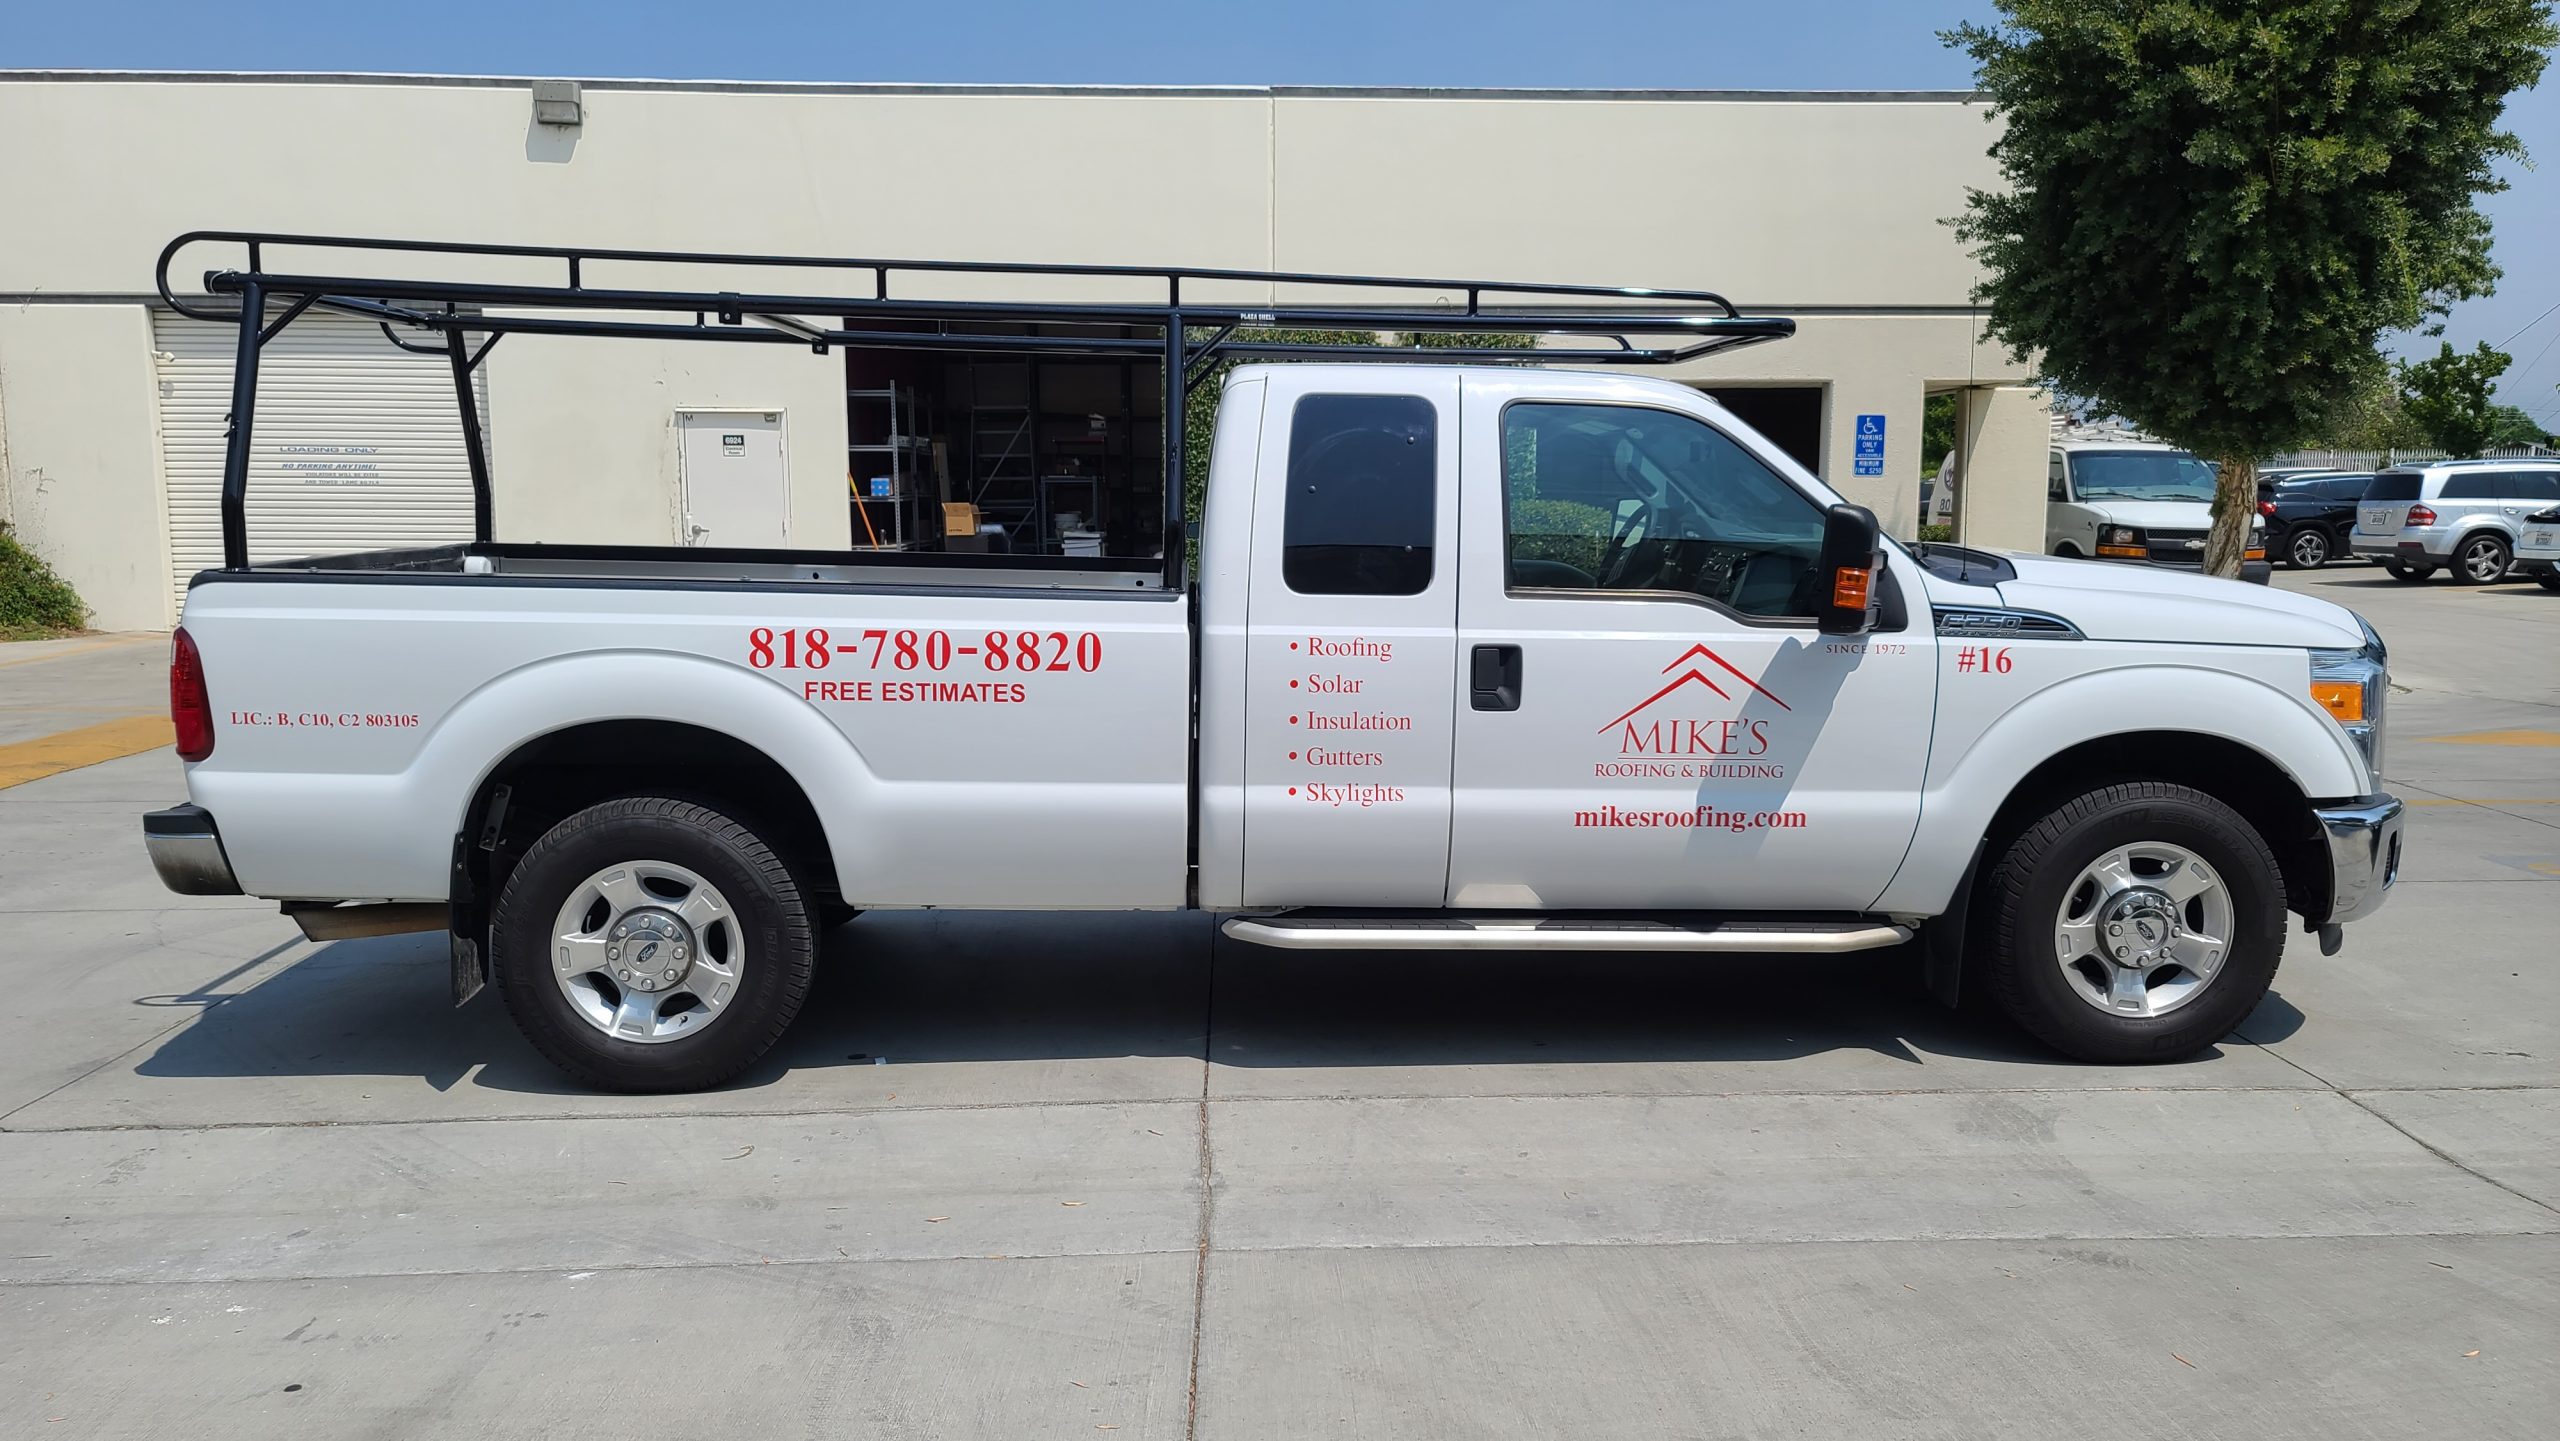 You are currently viewing Car Decals for Mike’s Roofing  in Van Nuys